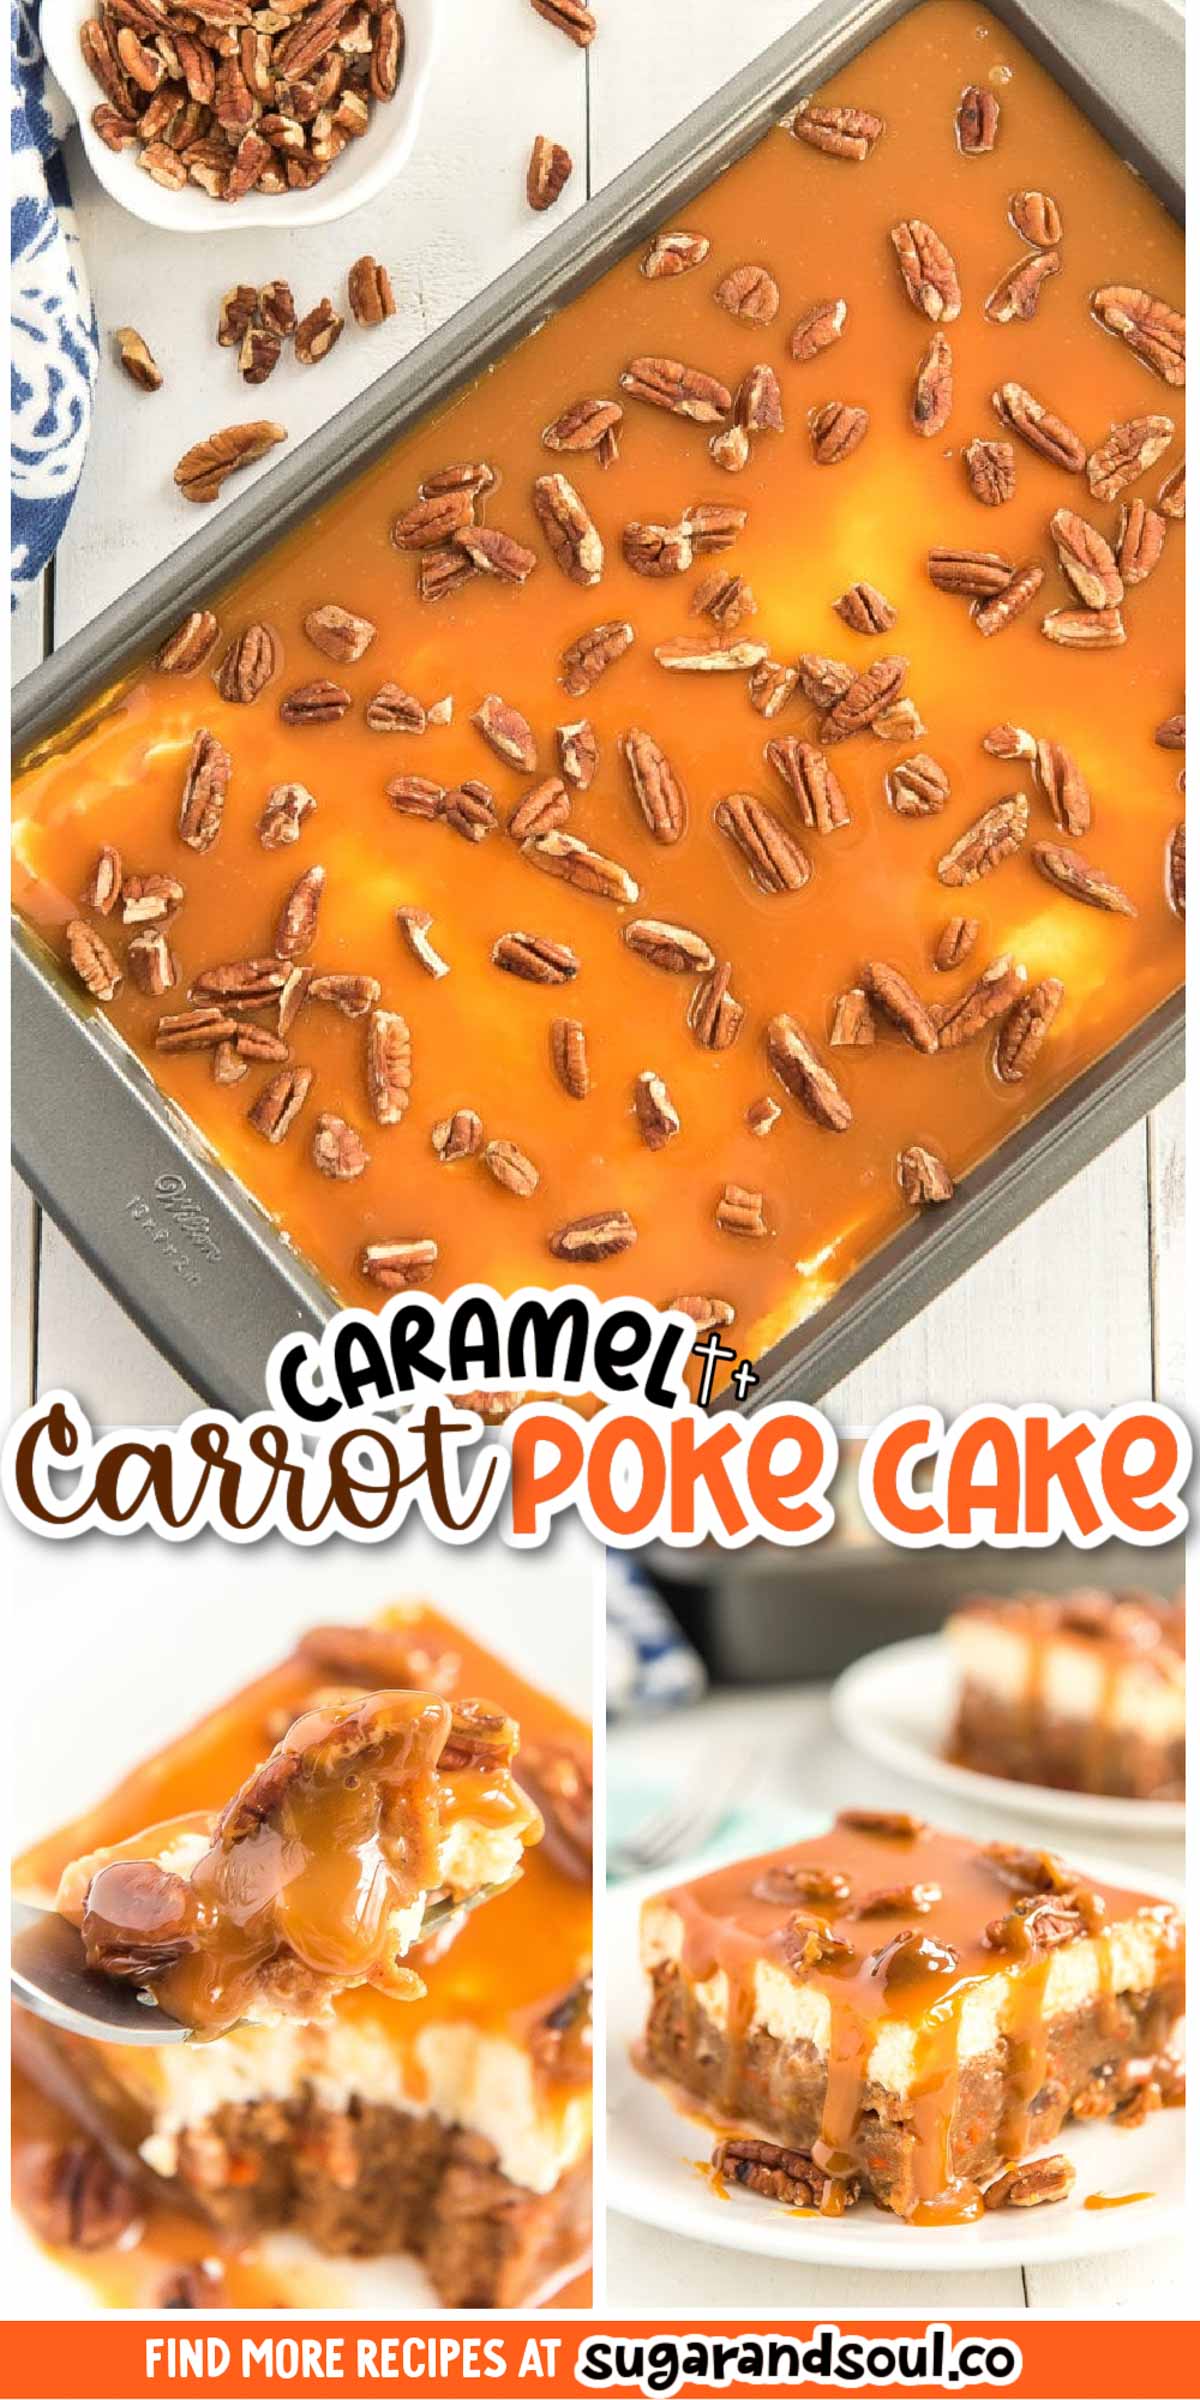 This Caramel Carrot Cake Poke Cake is so sweet and delicious, you'll never want any other carrot cake again! Baked to perfection and saturated in sweetened condensed milk, then topped with fluffy frosting and drenched in caramel sauce. via @sugarandsoulco